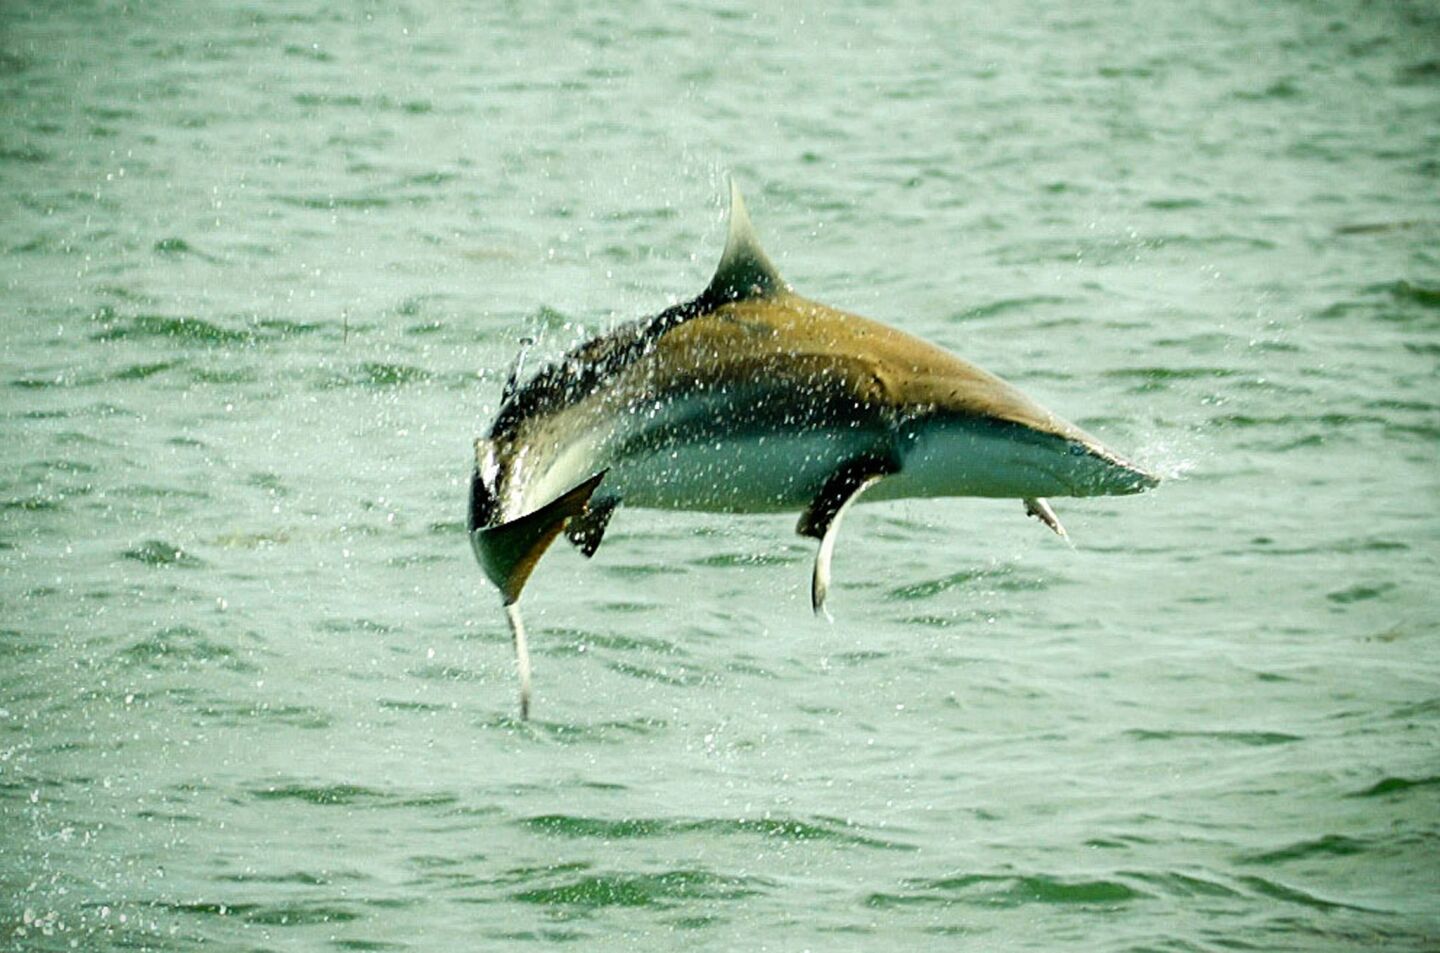 A spinner shark jumps out of the water in the Florida Keys. Spinner sharks are responsible for about 16% of Florida shark attacks since 1920, according to the International Shark Attack File.